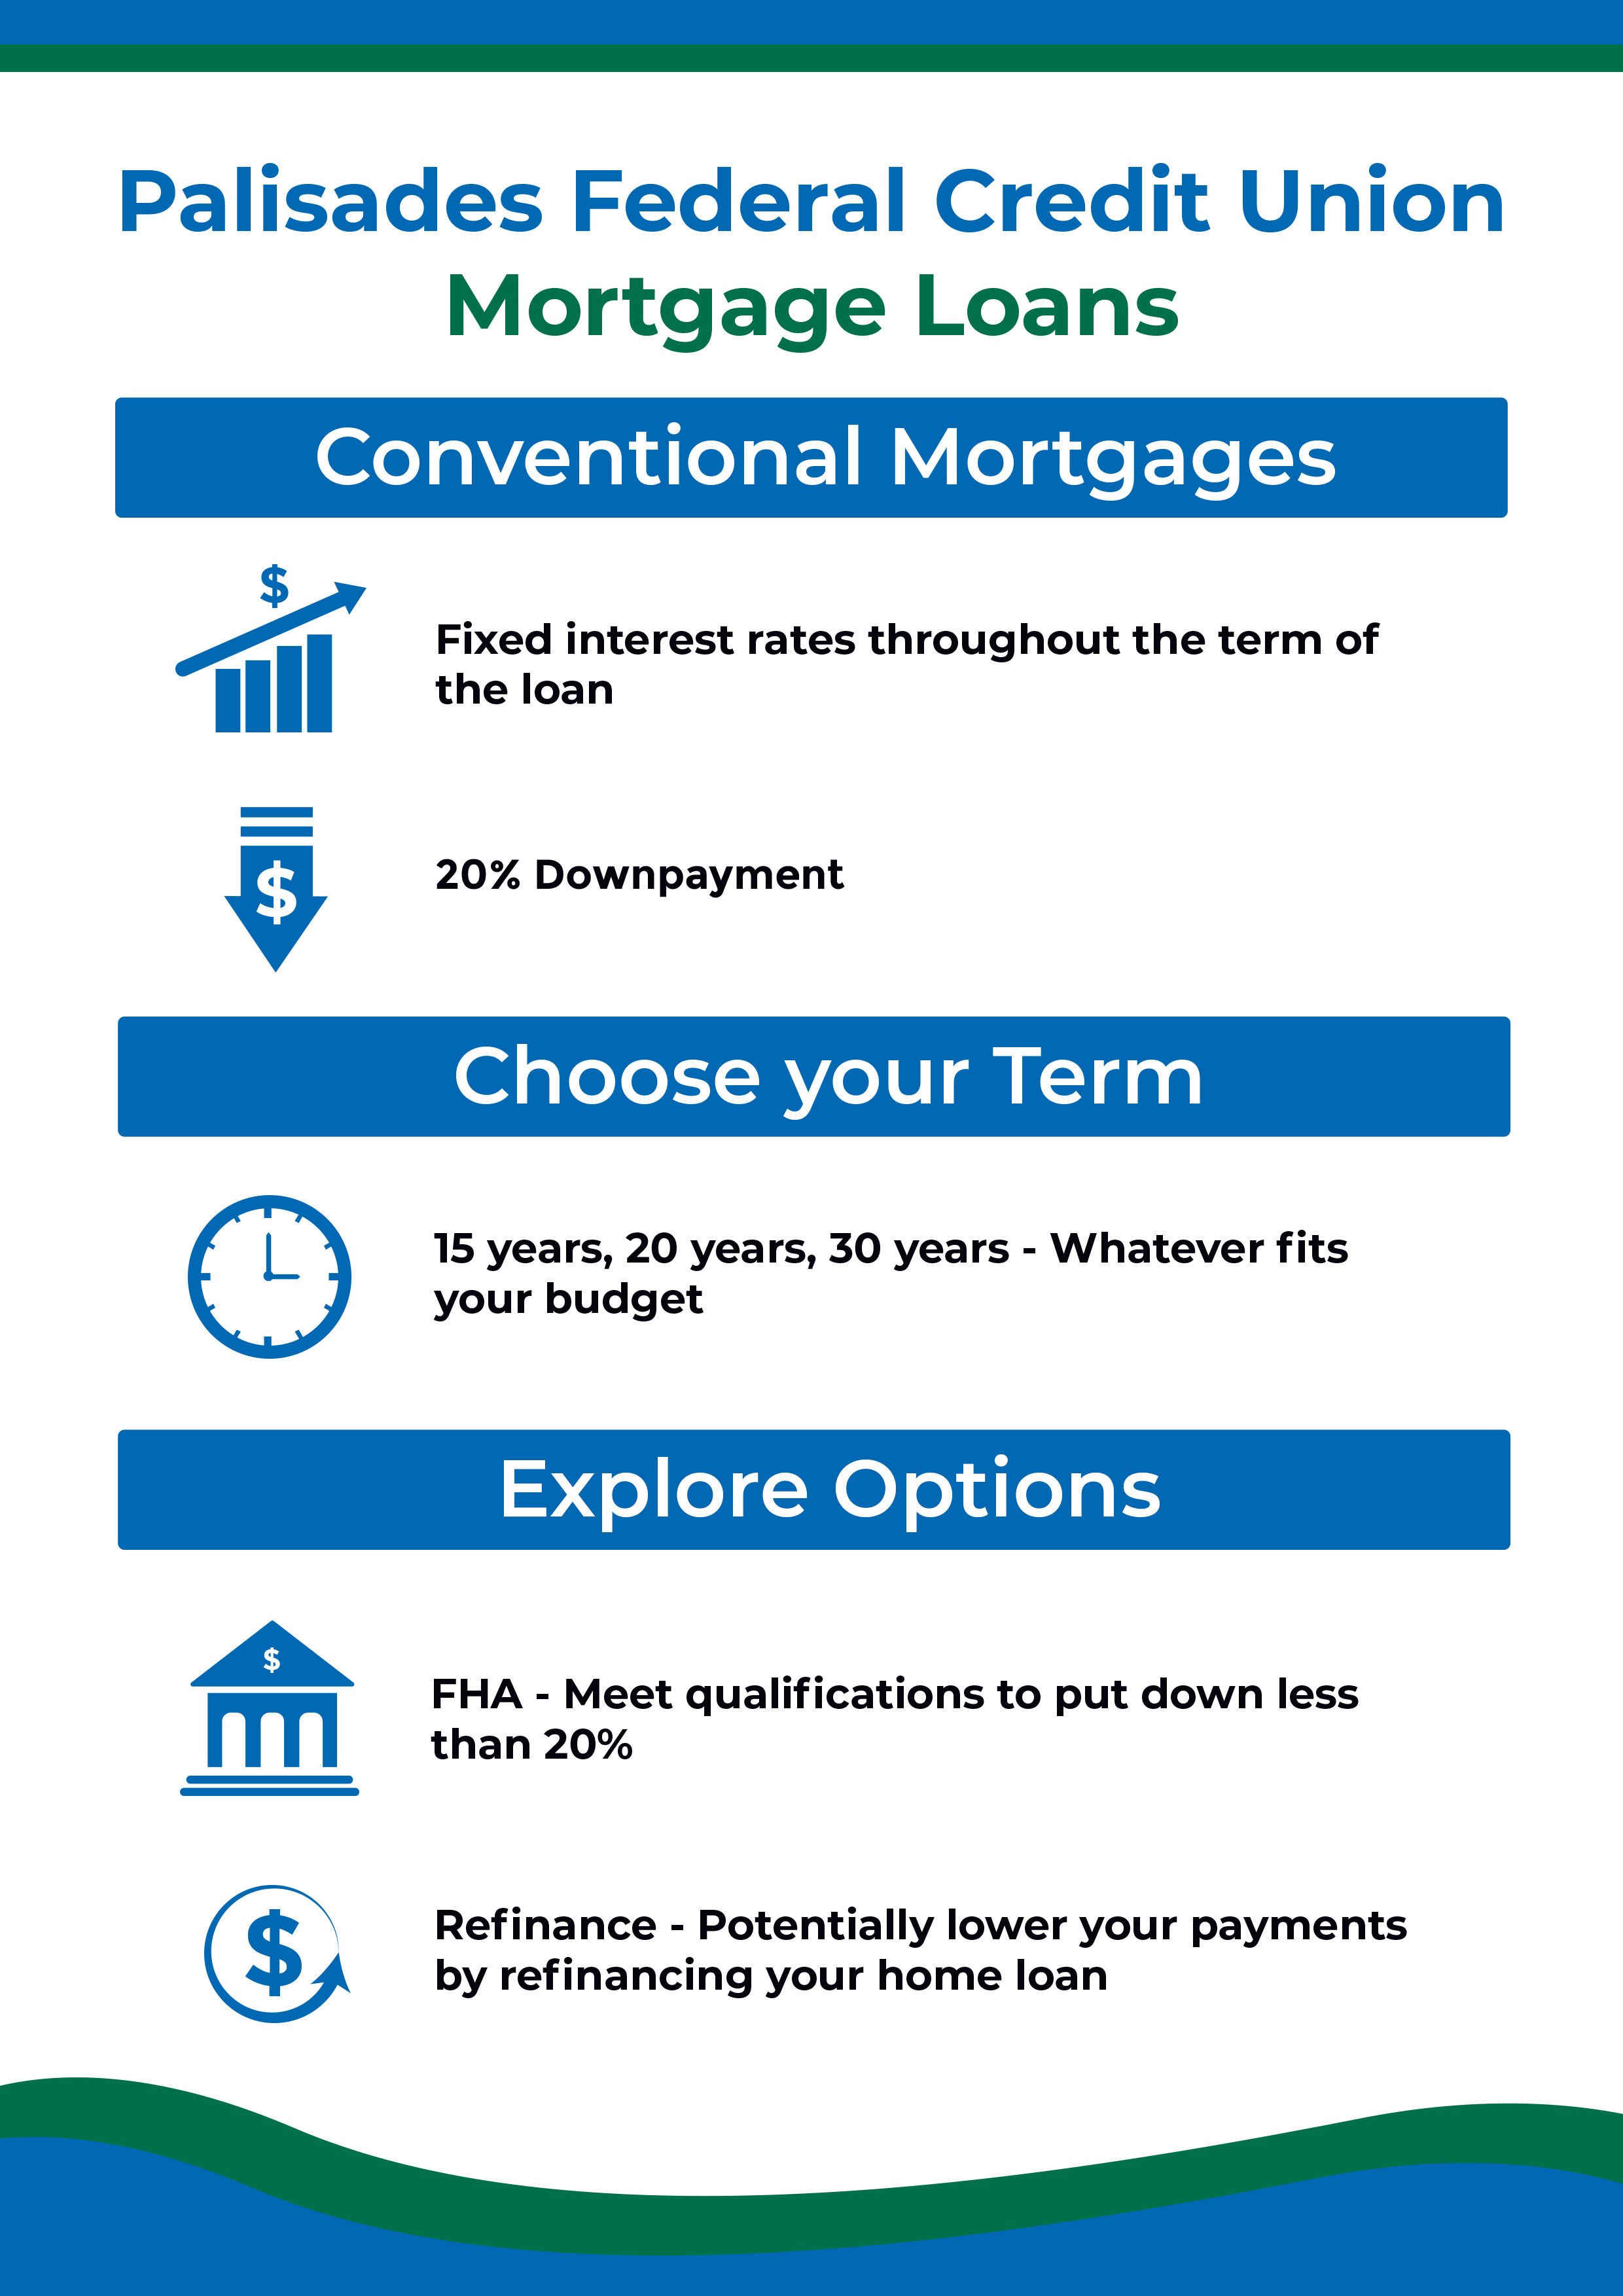  Palisades Federal Credit union Mortgage Loans - Choose Your Mortgage Type:  Conventional - Fixed interest rates throughout the term of the loan  Variable - Interest rates are not fixed and can vary with the market    Choose your Term:  15 years, 20 years, 30 years - Whatever fits your budget    Explore options:  FHA - Meet qualifications to put down less than 20%  VA - $0-down-payment option issued partially backed by the Department of Veterans Affairs.  Refinance - Potentially lower your payments by refinancing your home loan